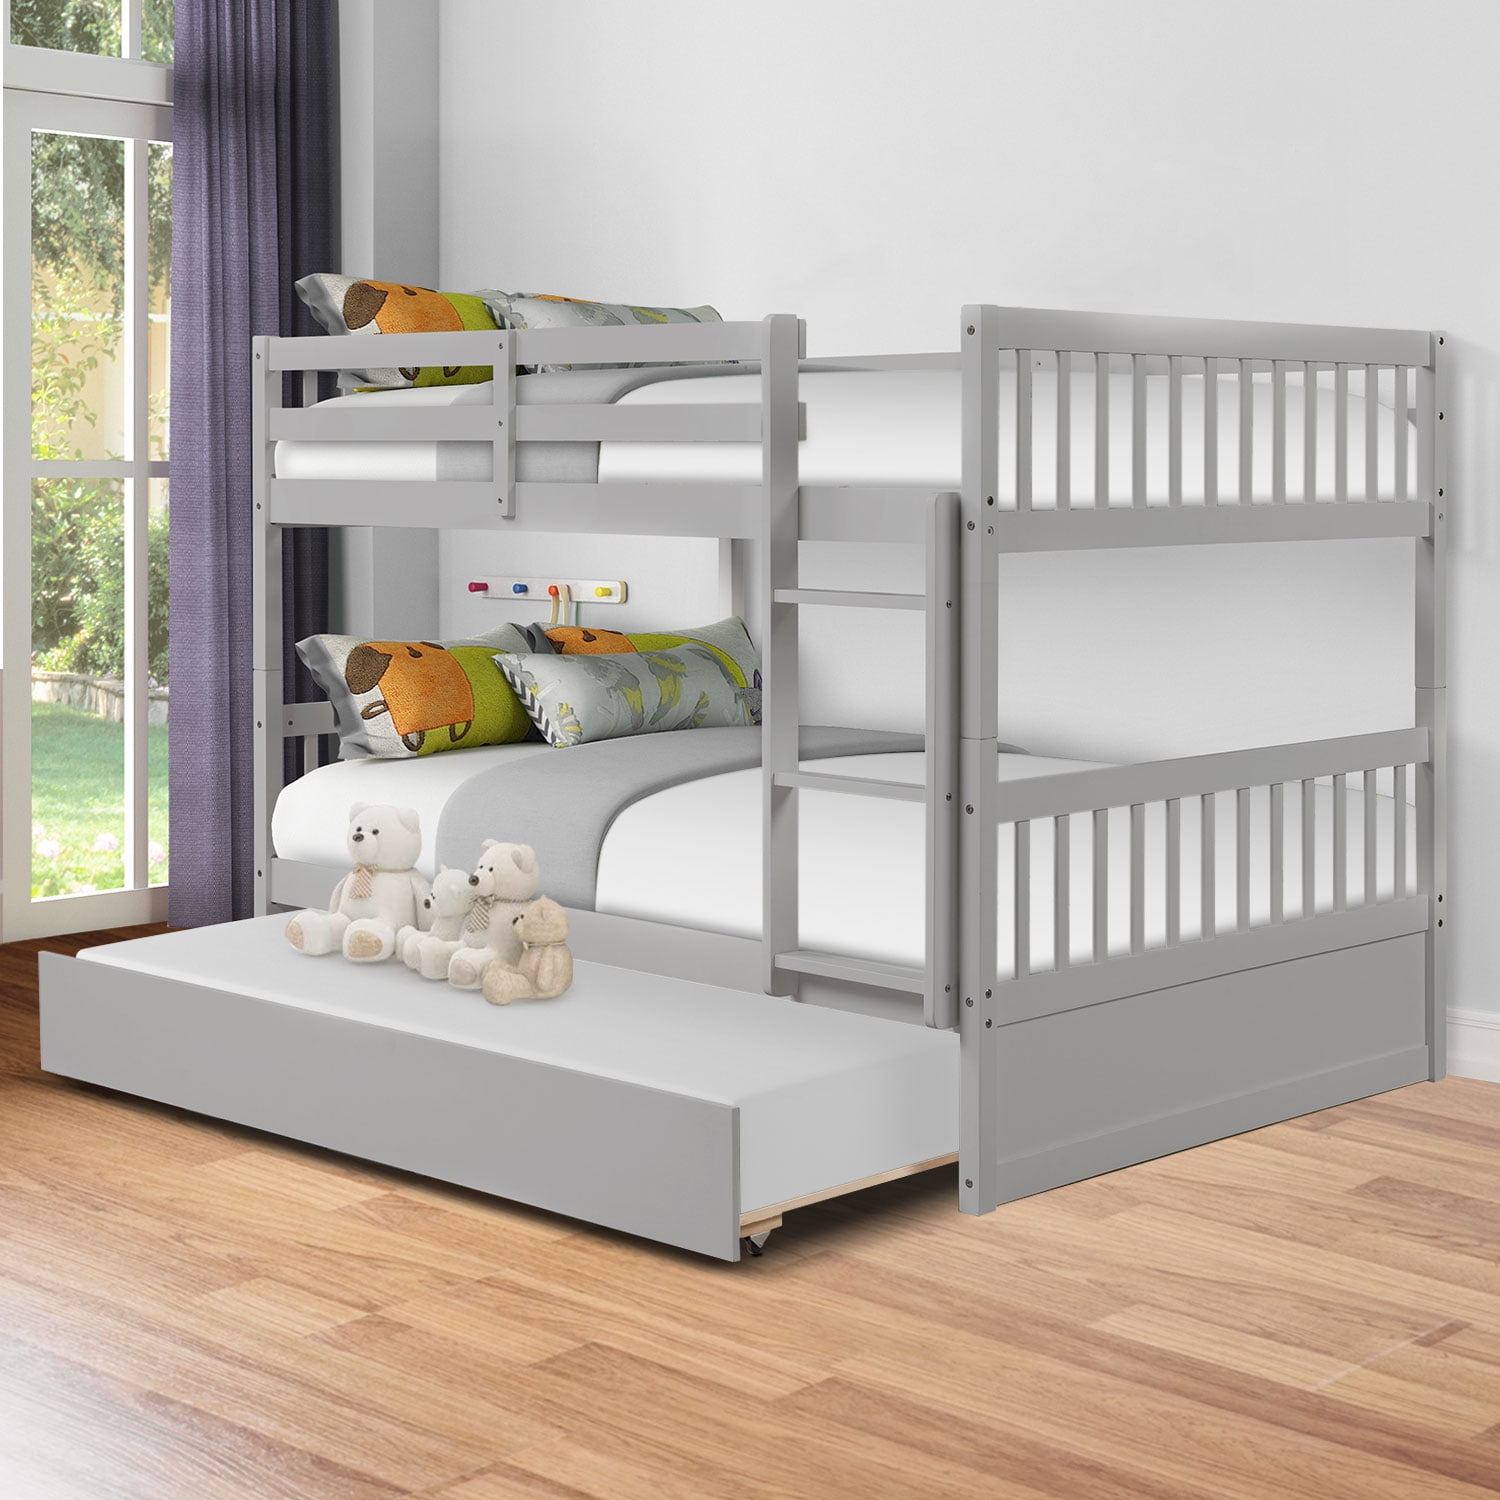 Trundle Sweden Pine Wood Bunk Beds, Bunk Bed With Pull Out Bed